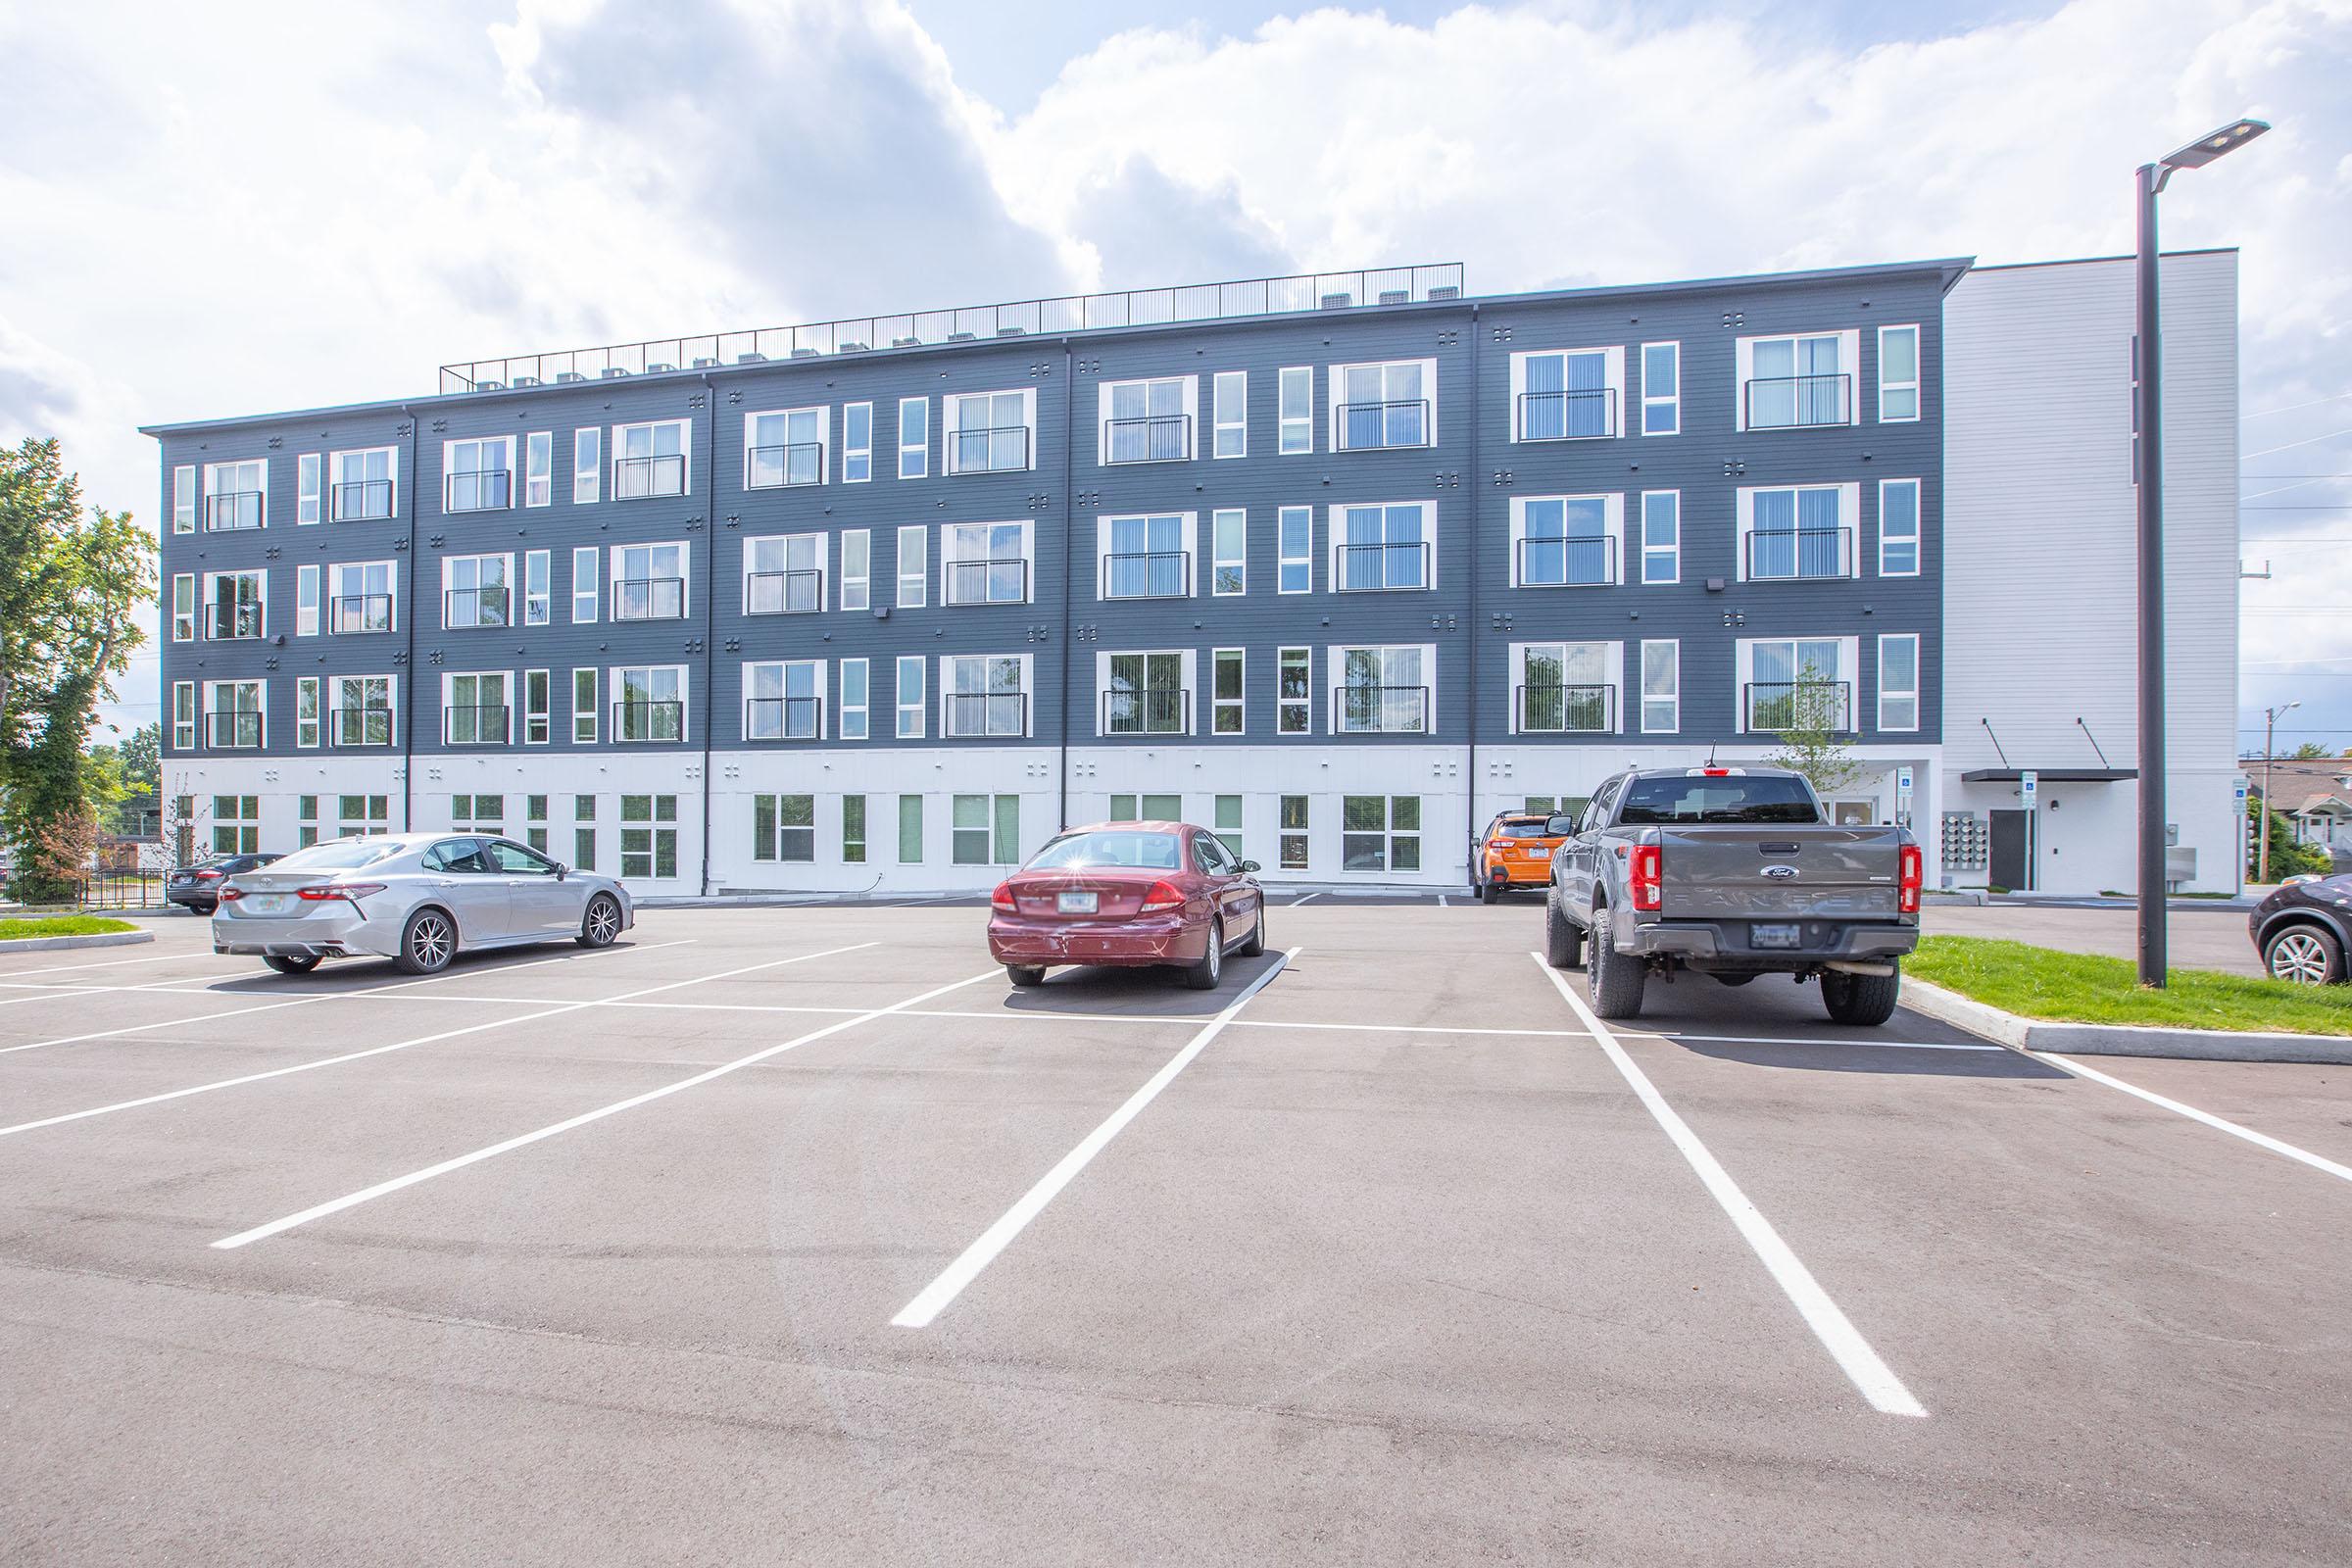 Studio 79 offers surface parking